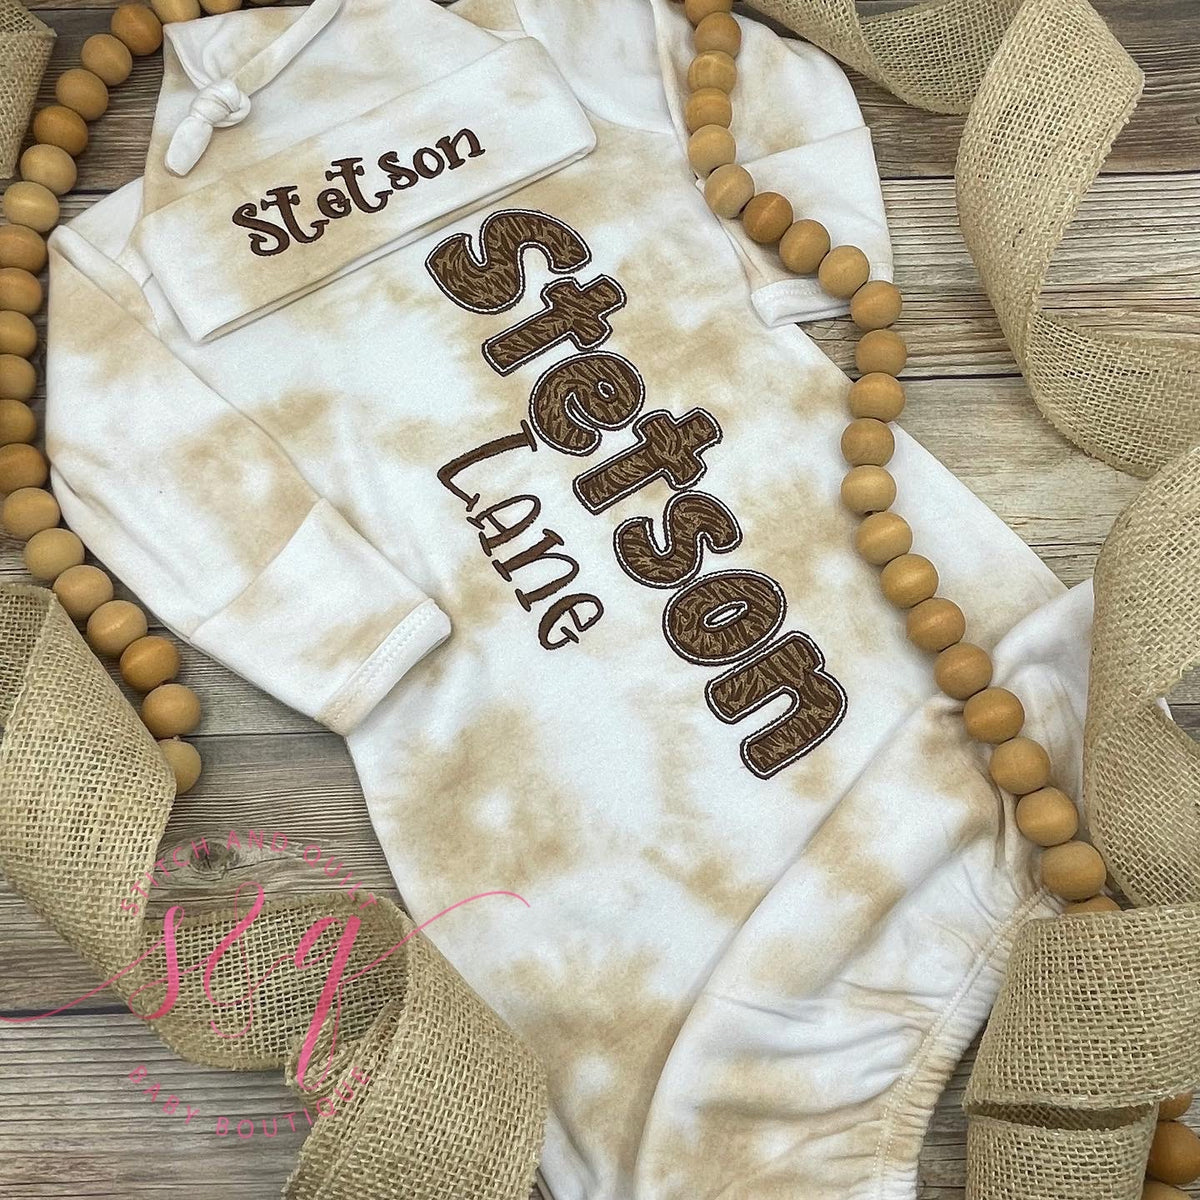 Baby Coming Home Outfit, Highland Cow, Scottish cow, Baby Boy Coming Home Outfit, Newborn Hospital Gown, Baby Shower Gift